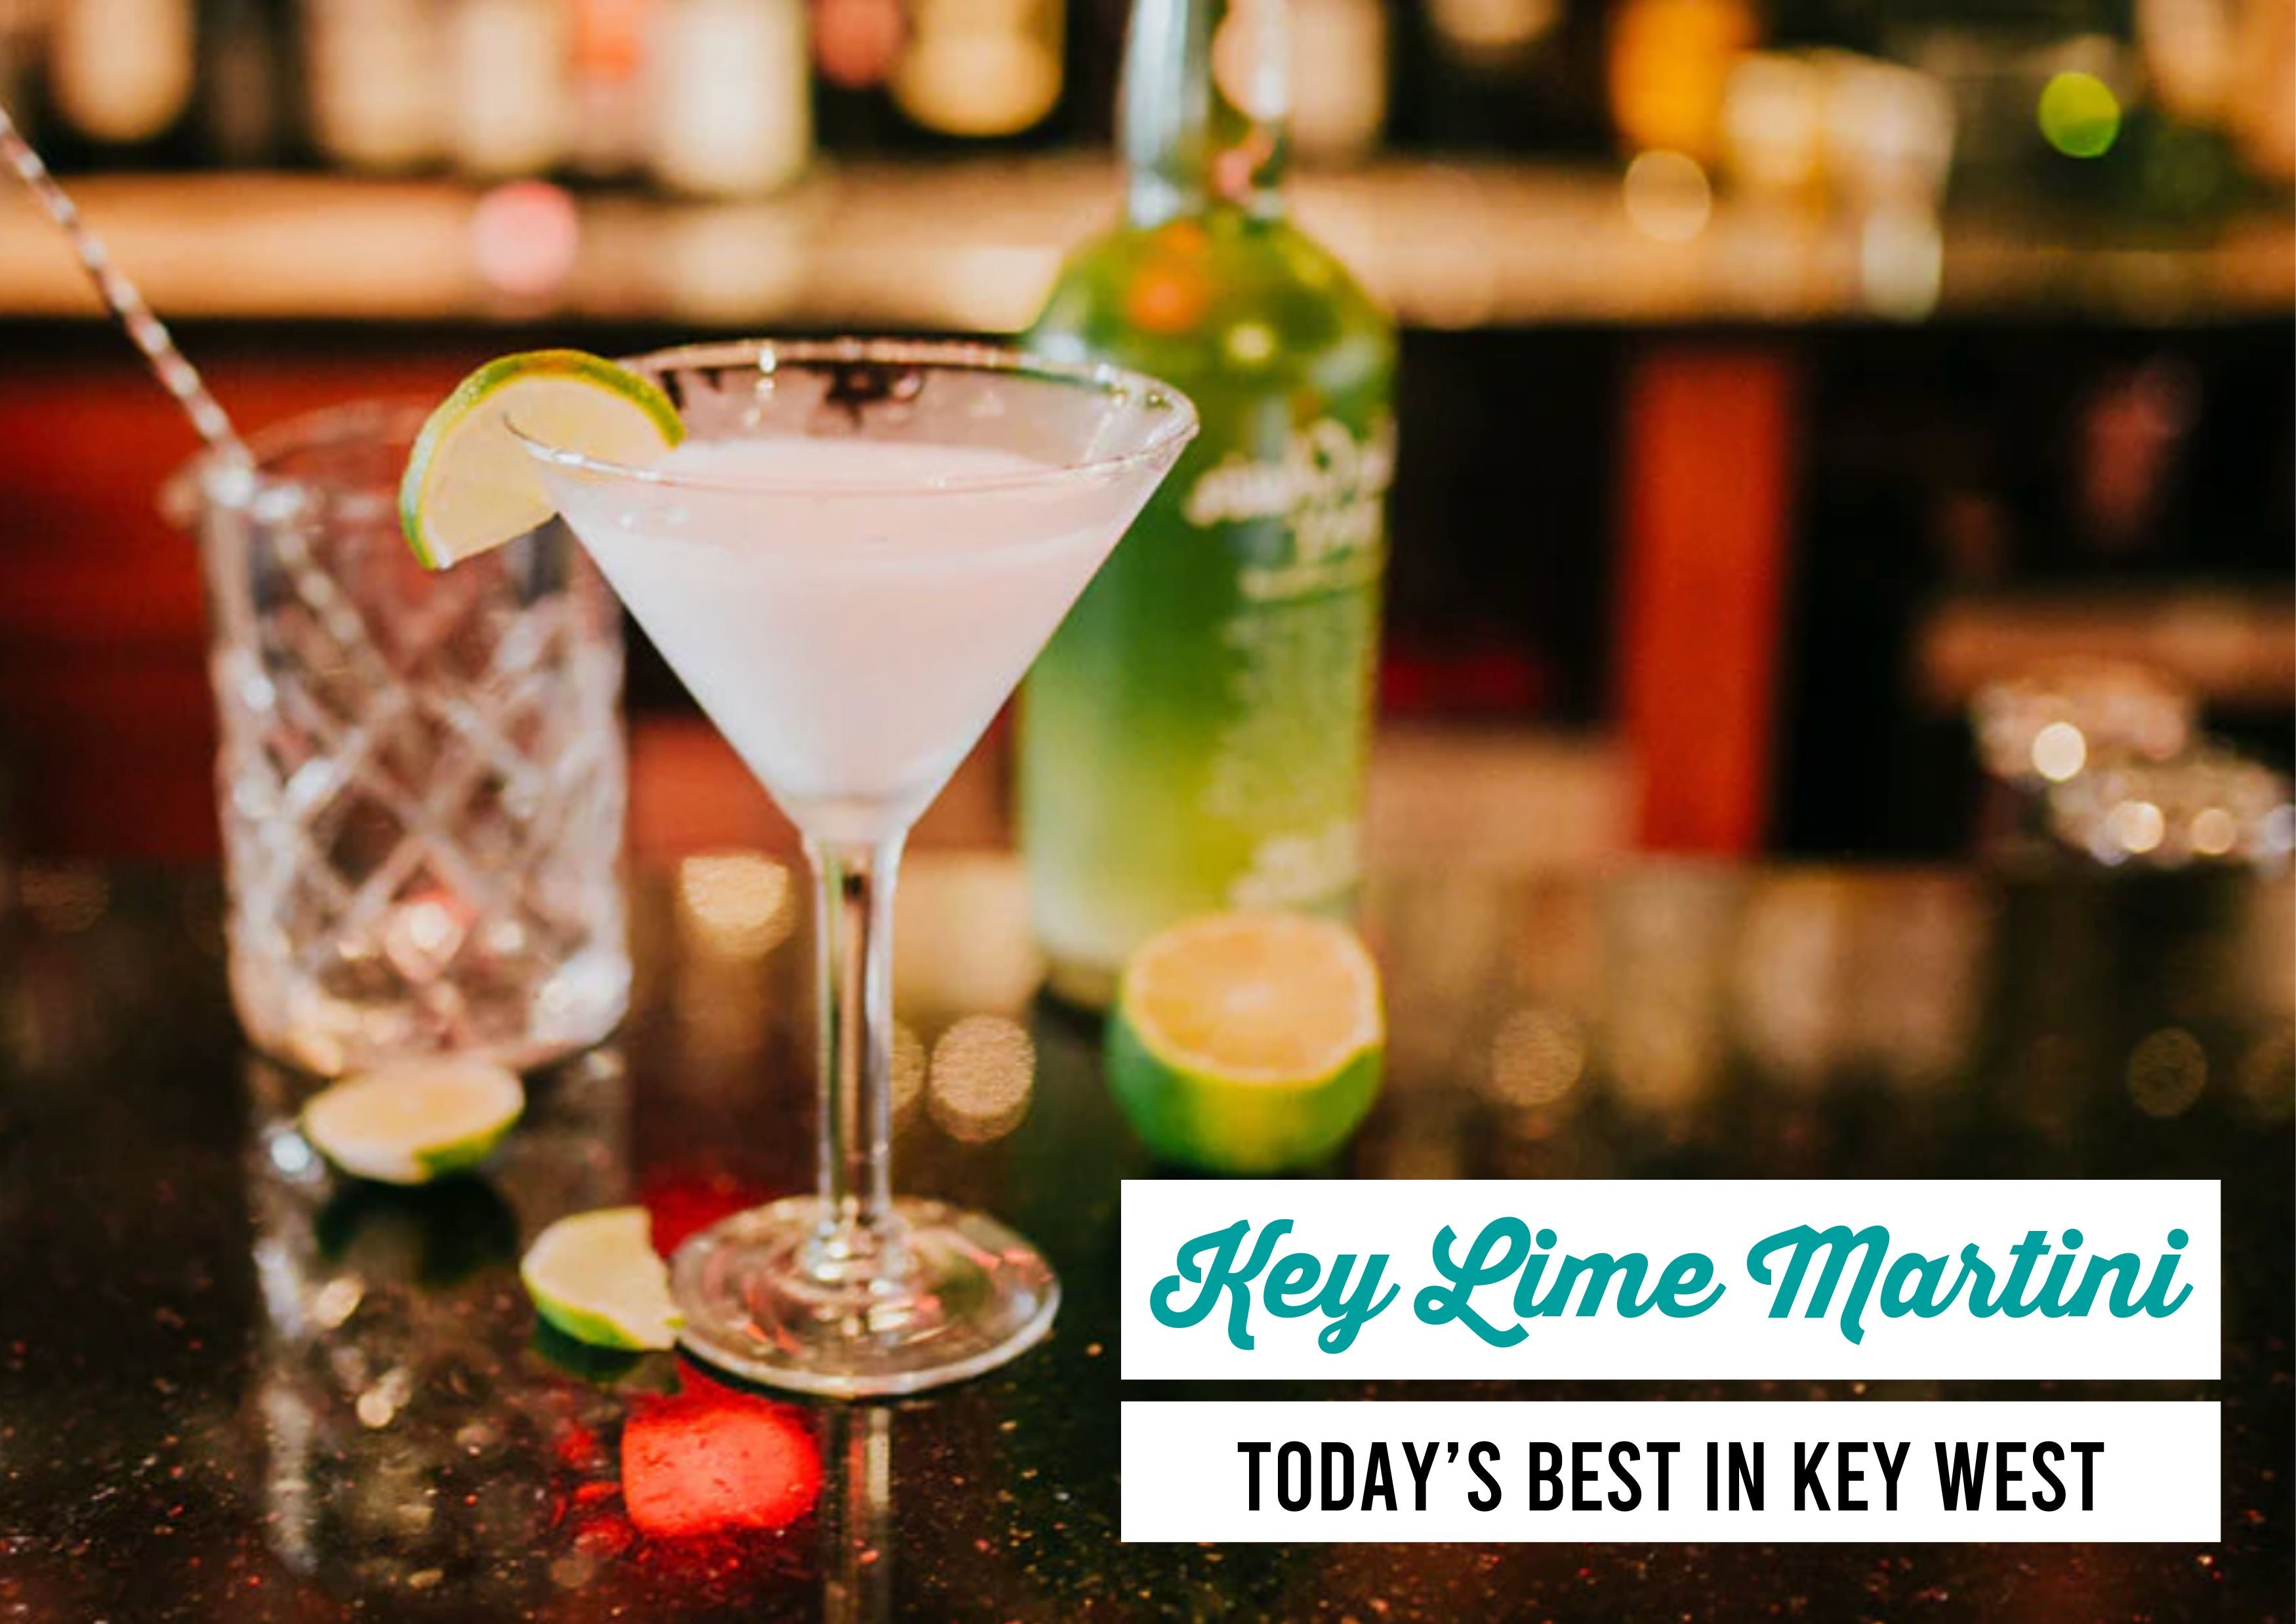 Key Lime Martini – Today's Best in Key West